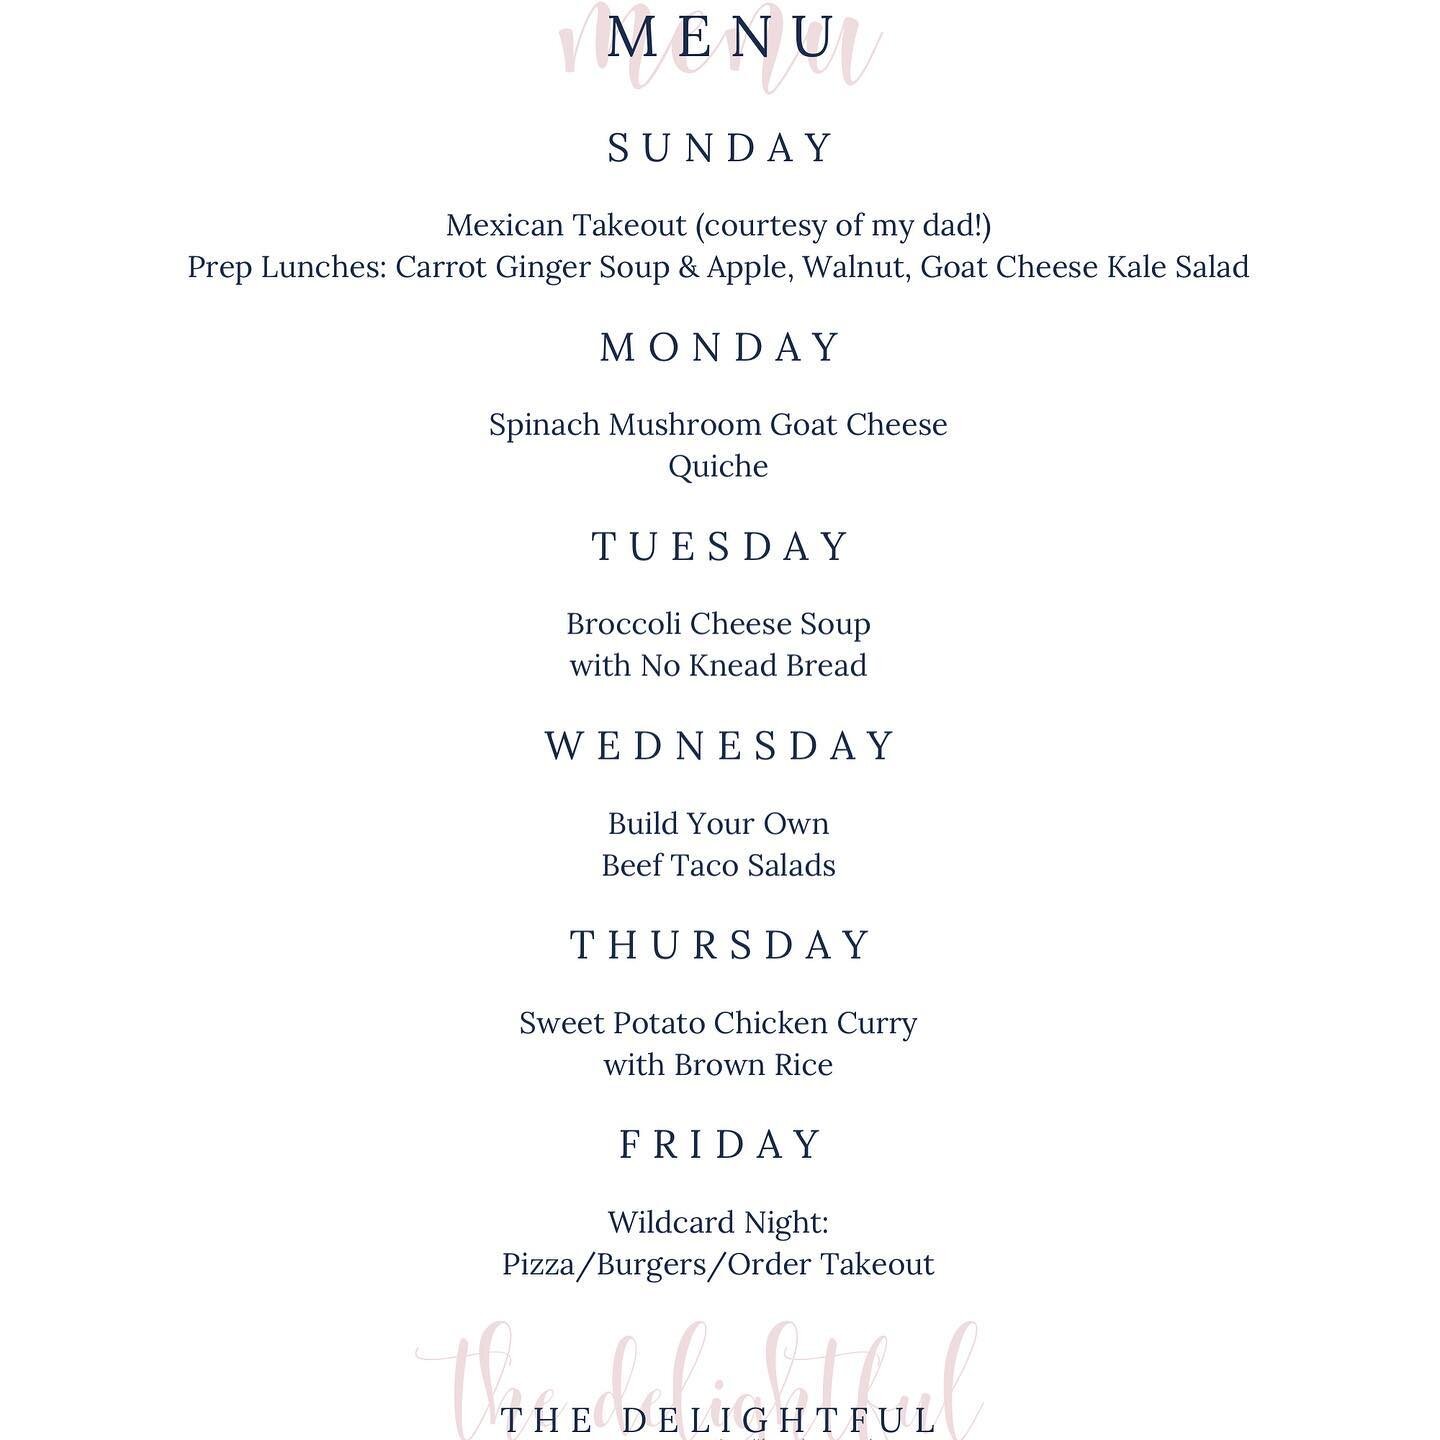 This week&rsquo;s menu 🍽 features some trusty family 👨&zwj;👩&zwj;👧&zwj;👦 favorites (Build Your Own Taco 🌮 Salad) and some new takes on classics (Spinach 🥬 Mushroom 🍄 Goat Cheese 🧀 Quiche). Follow along in stories for meal prep!

#mombosslife